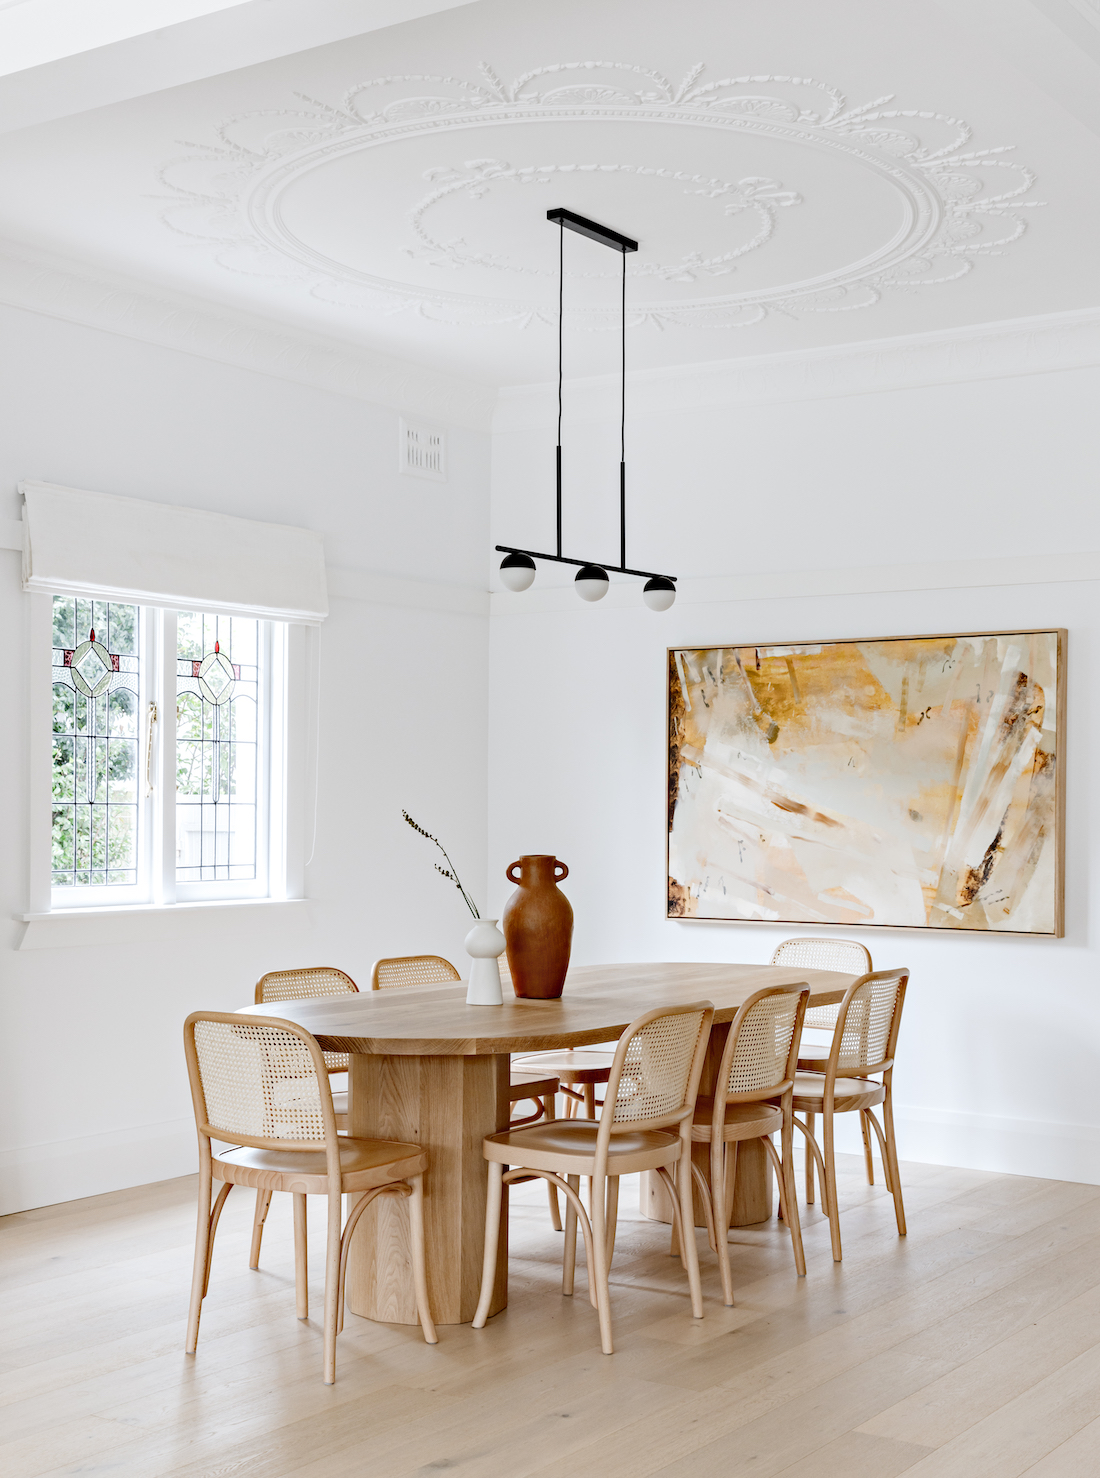 Dining room with pendant light and large artwork